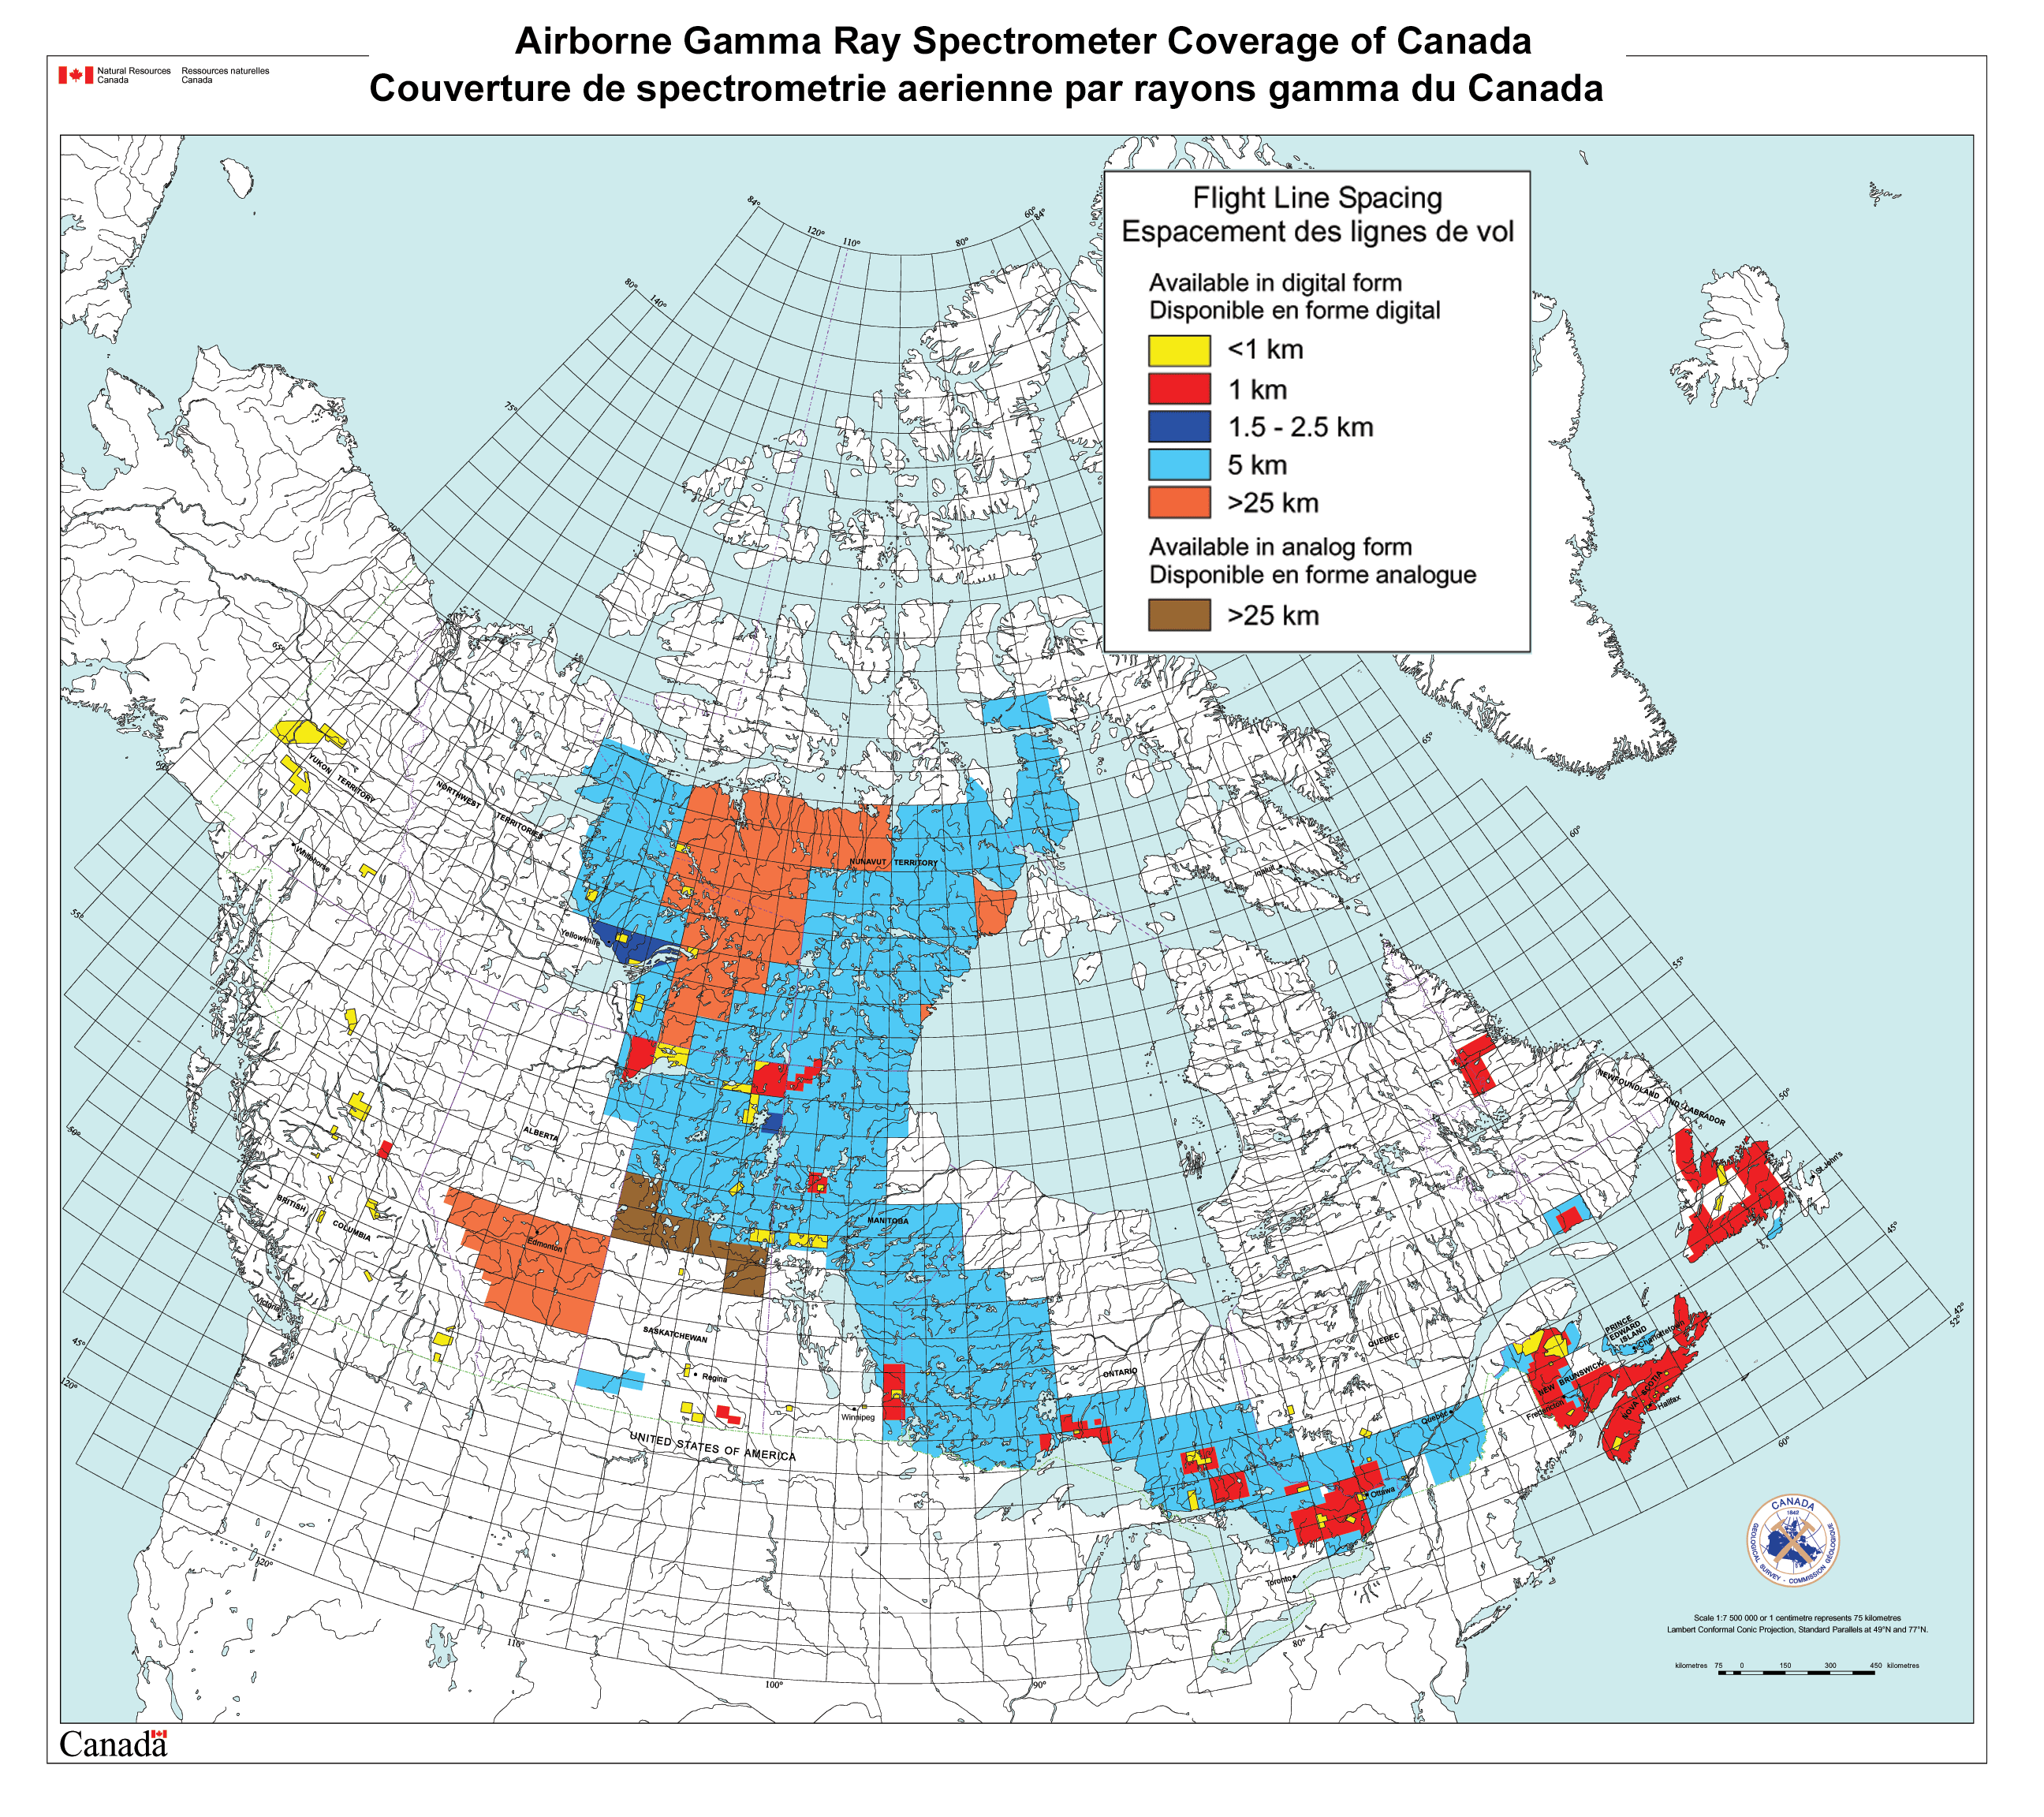 Image showing aerial gamma-ray coverage in Canada.